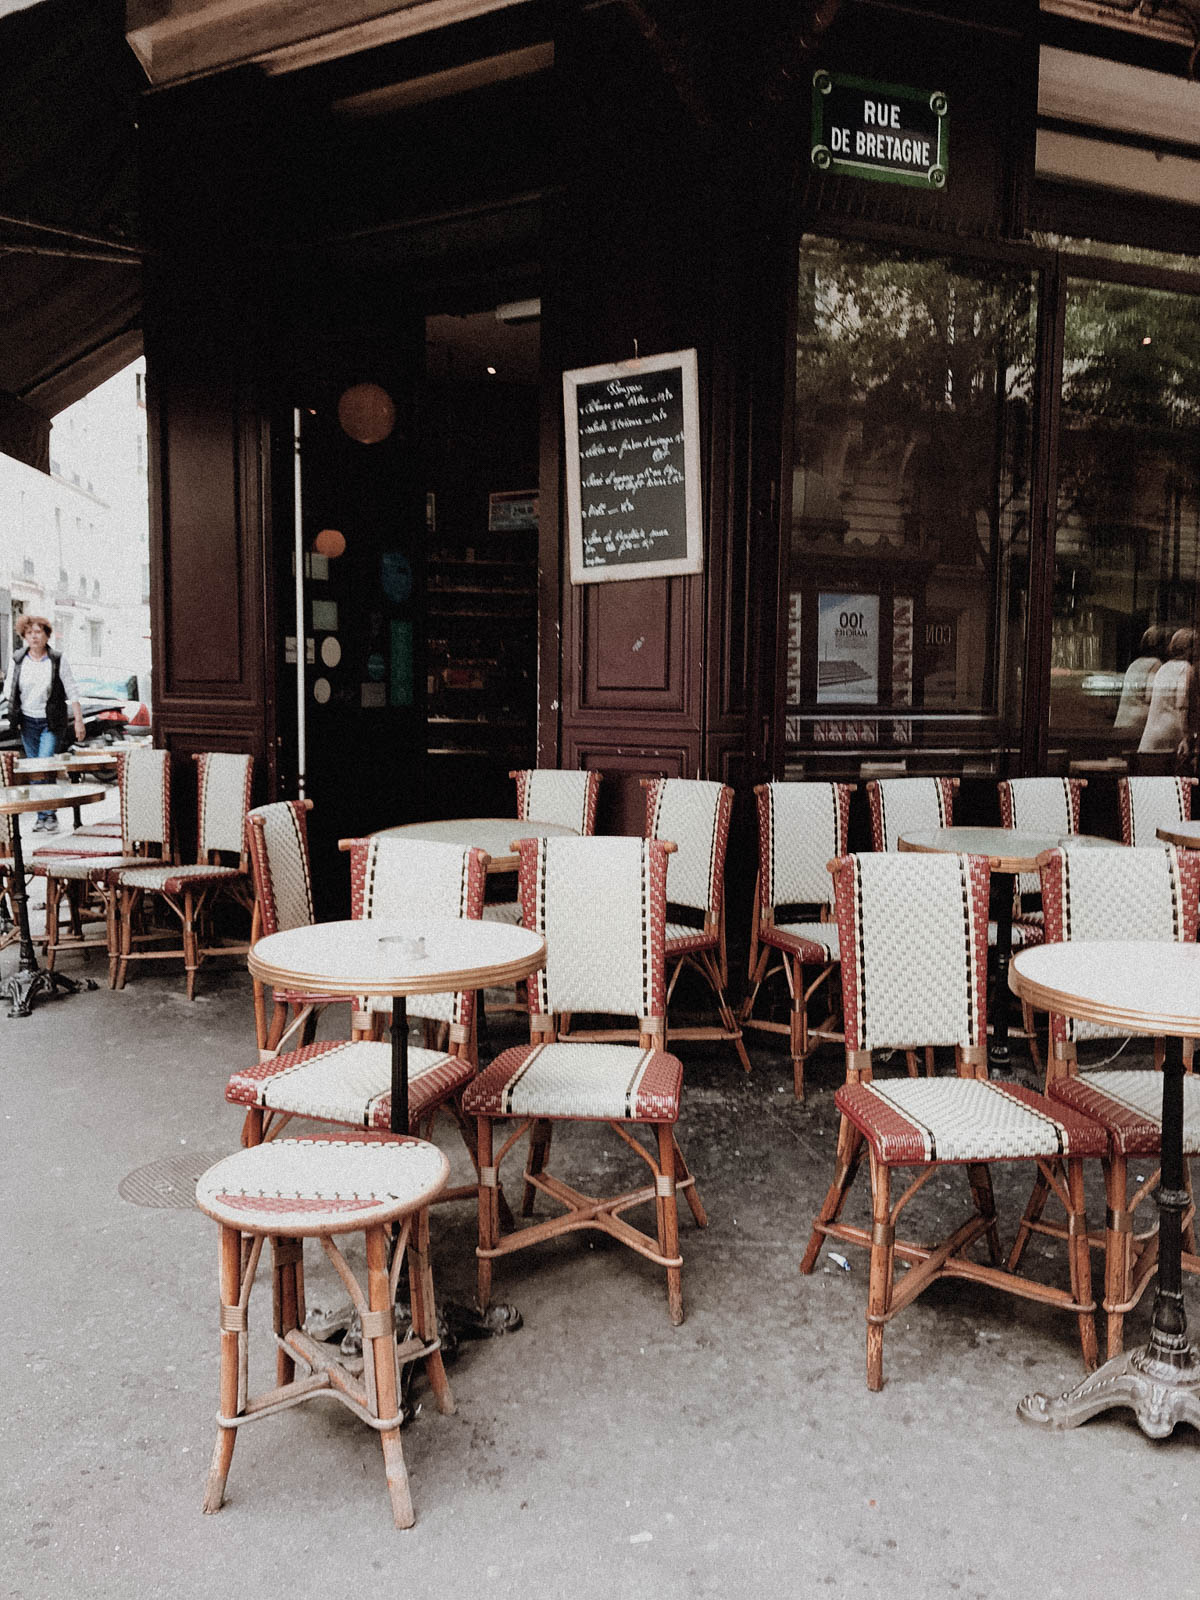 Paris France Travel Guide - Classic Vintage French Cafe Tables / RG Daily Blog